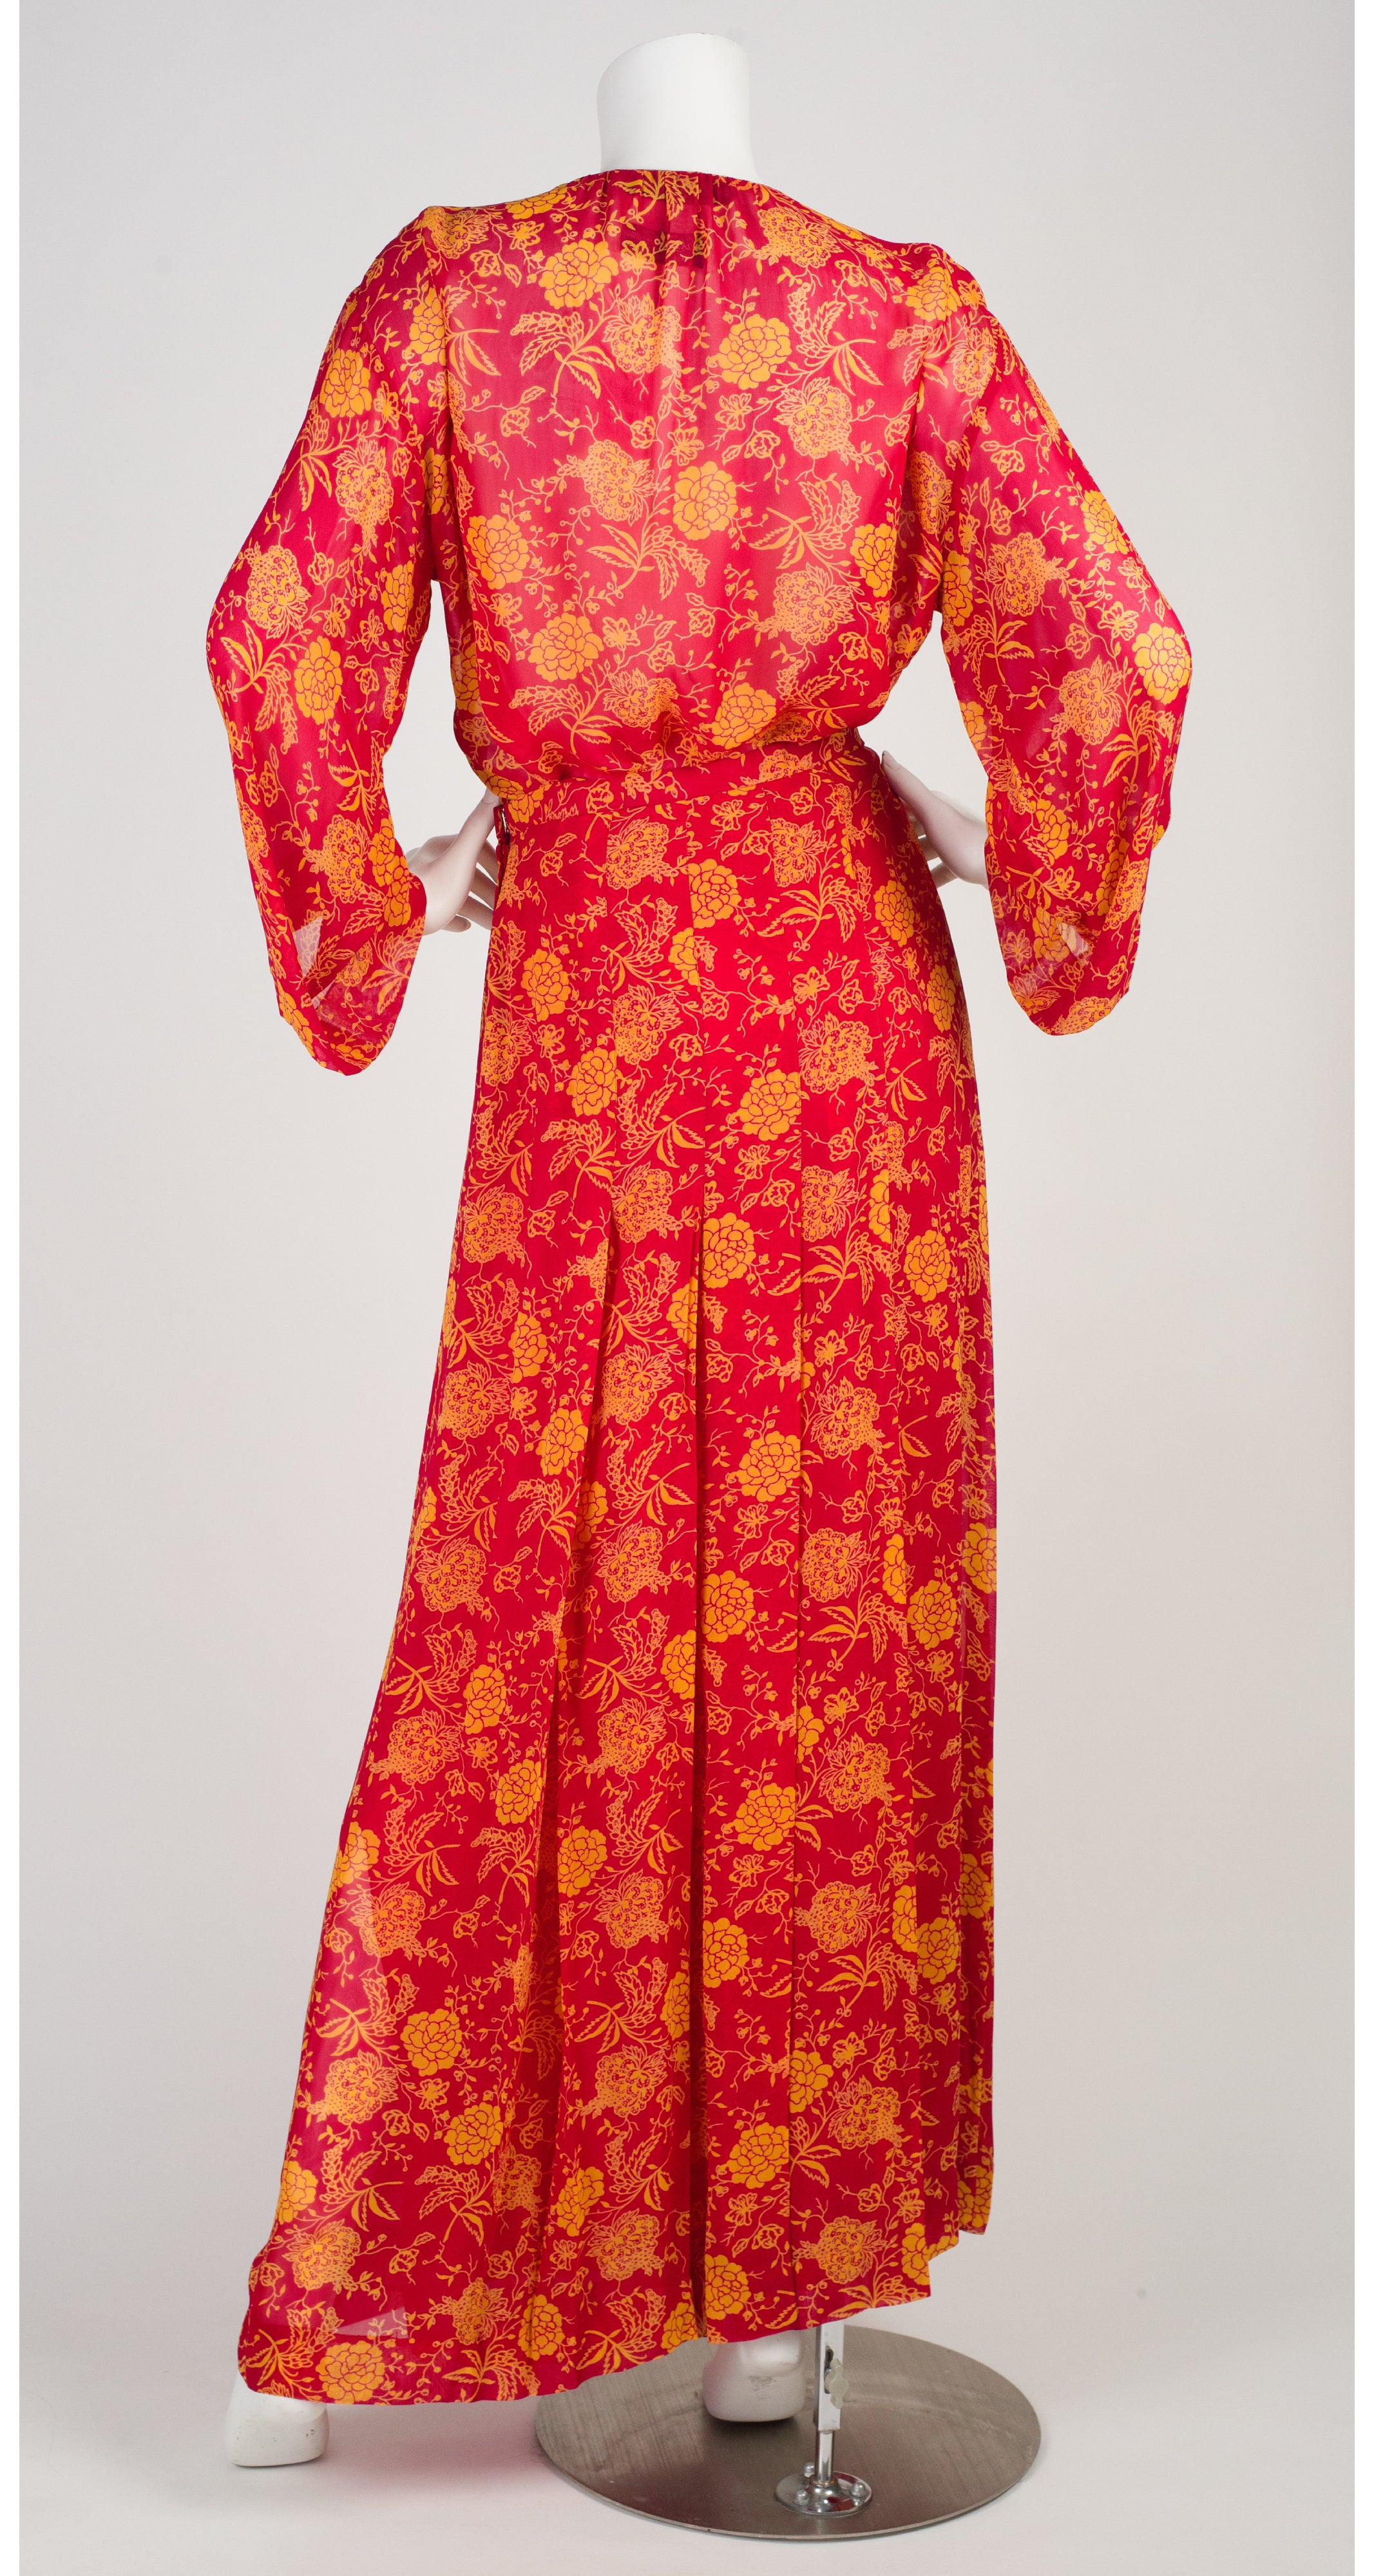 1976 Documented Red & Yellow Floral Chiffon Blouse & Skirt Set